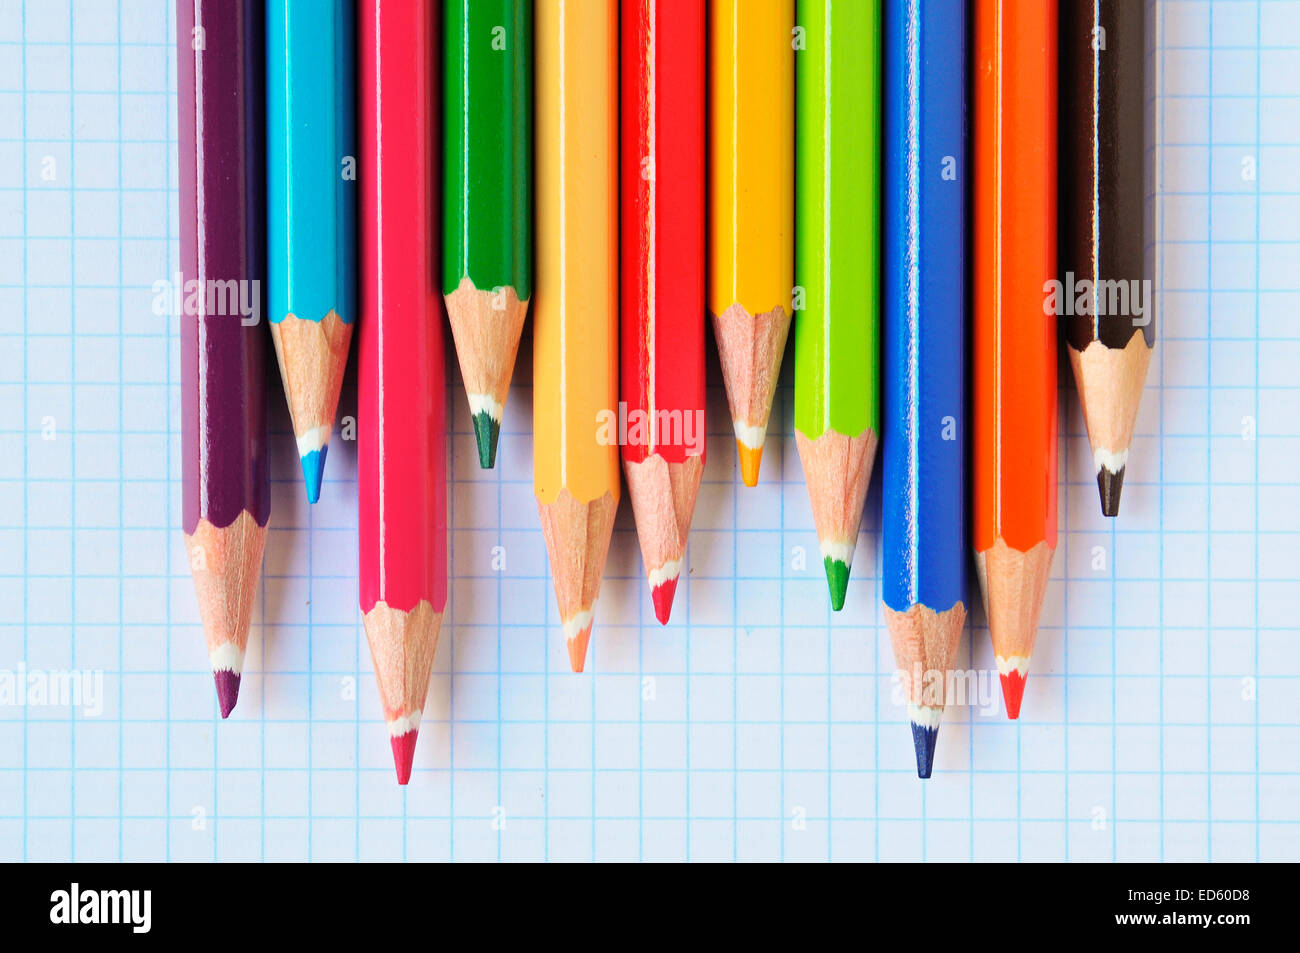 closeup of some wooden coloured pencils of different colors on a checkered paper background Stock Photo